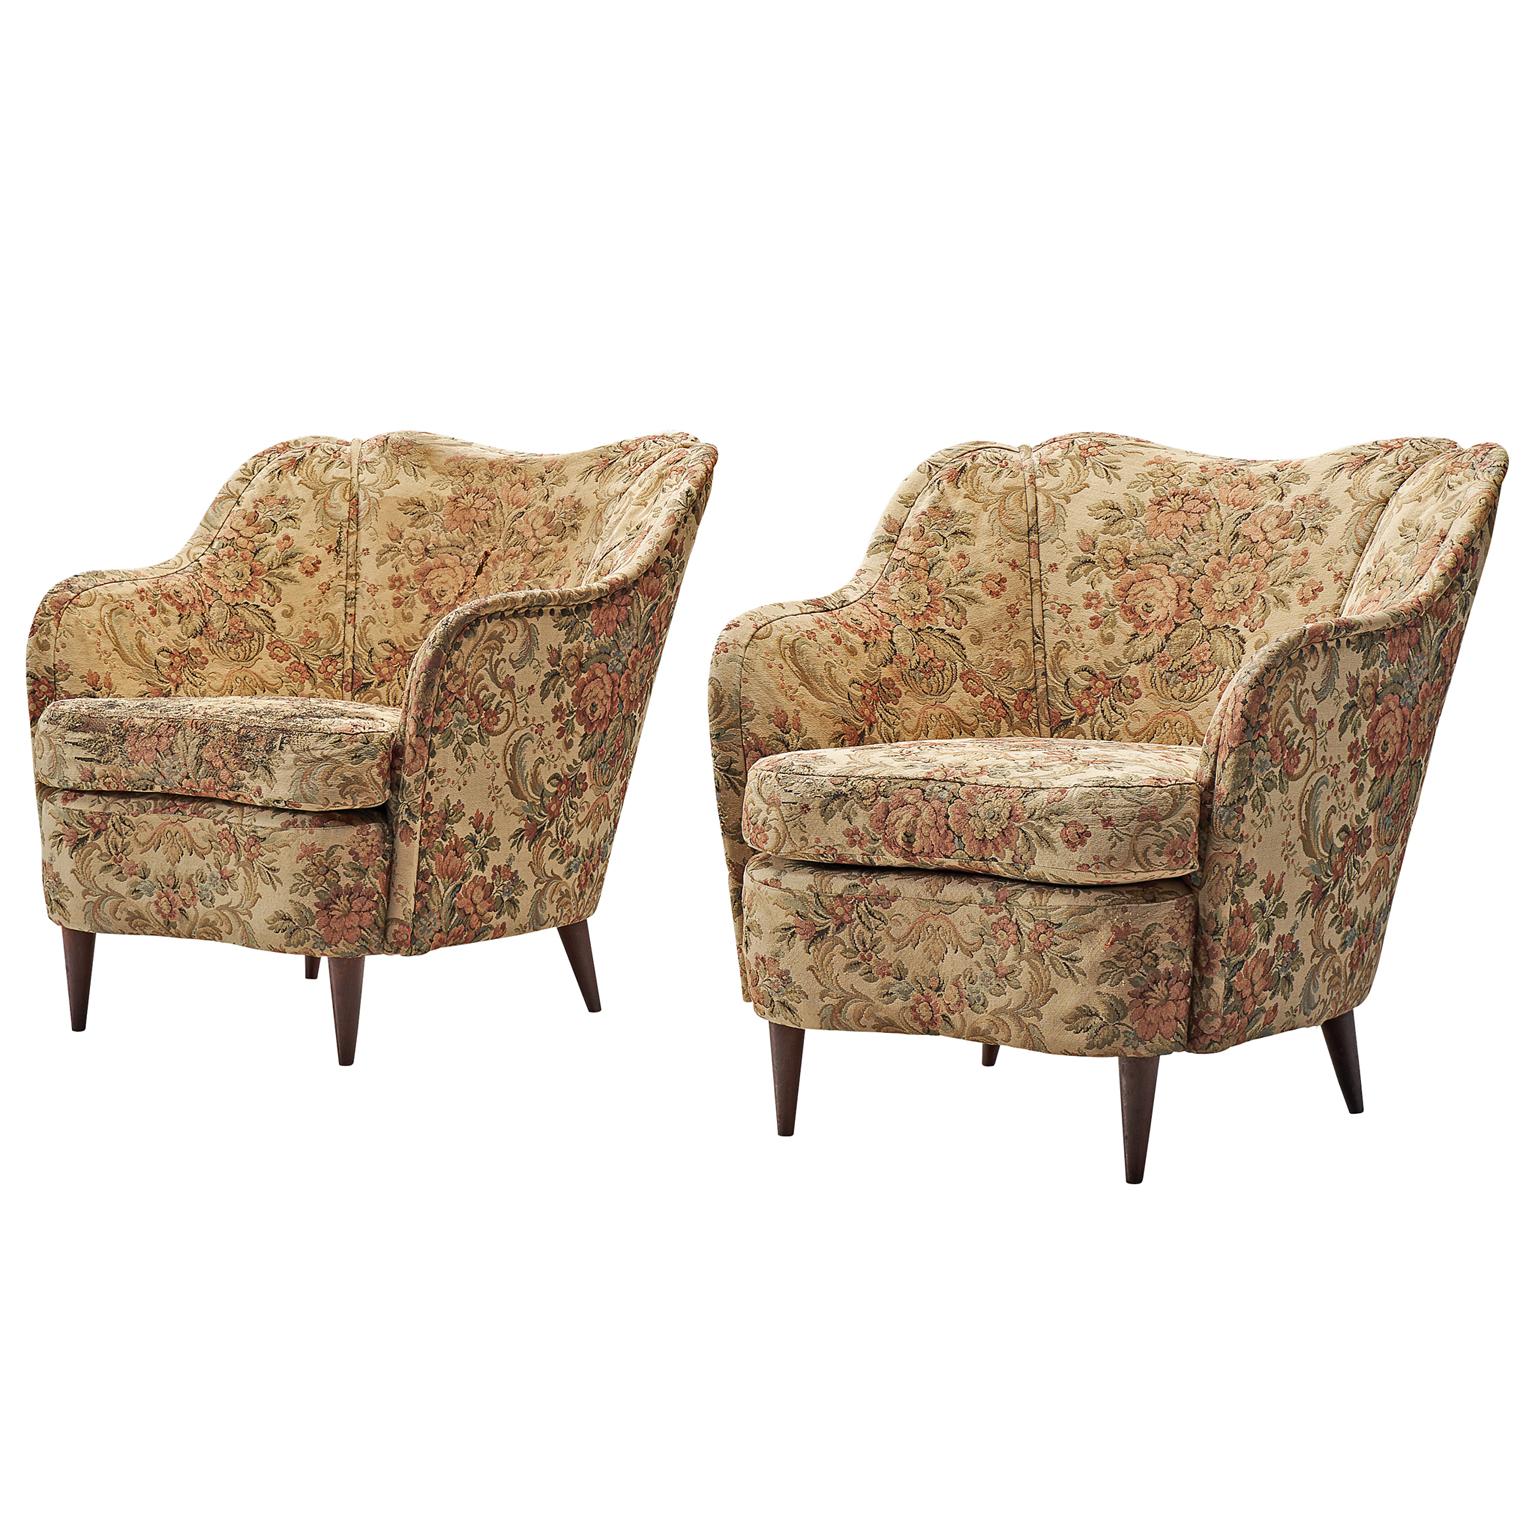 Pair of Lounge Chairs with Original Floral Upholstery